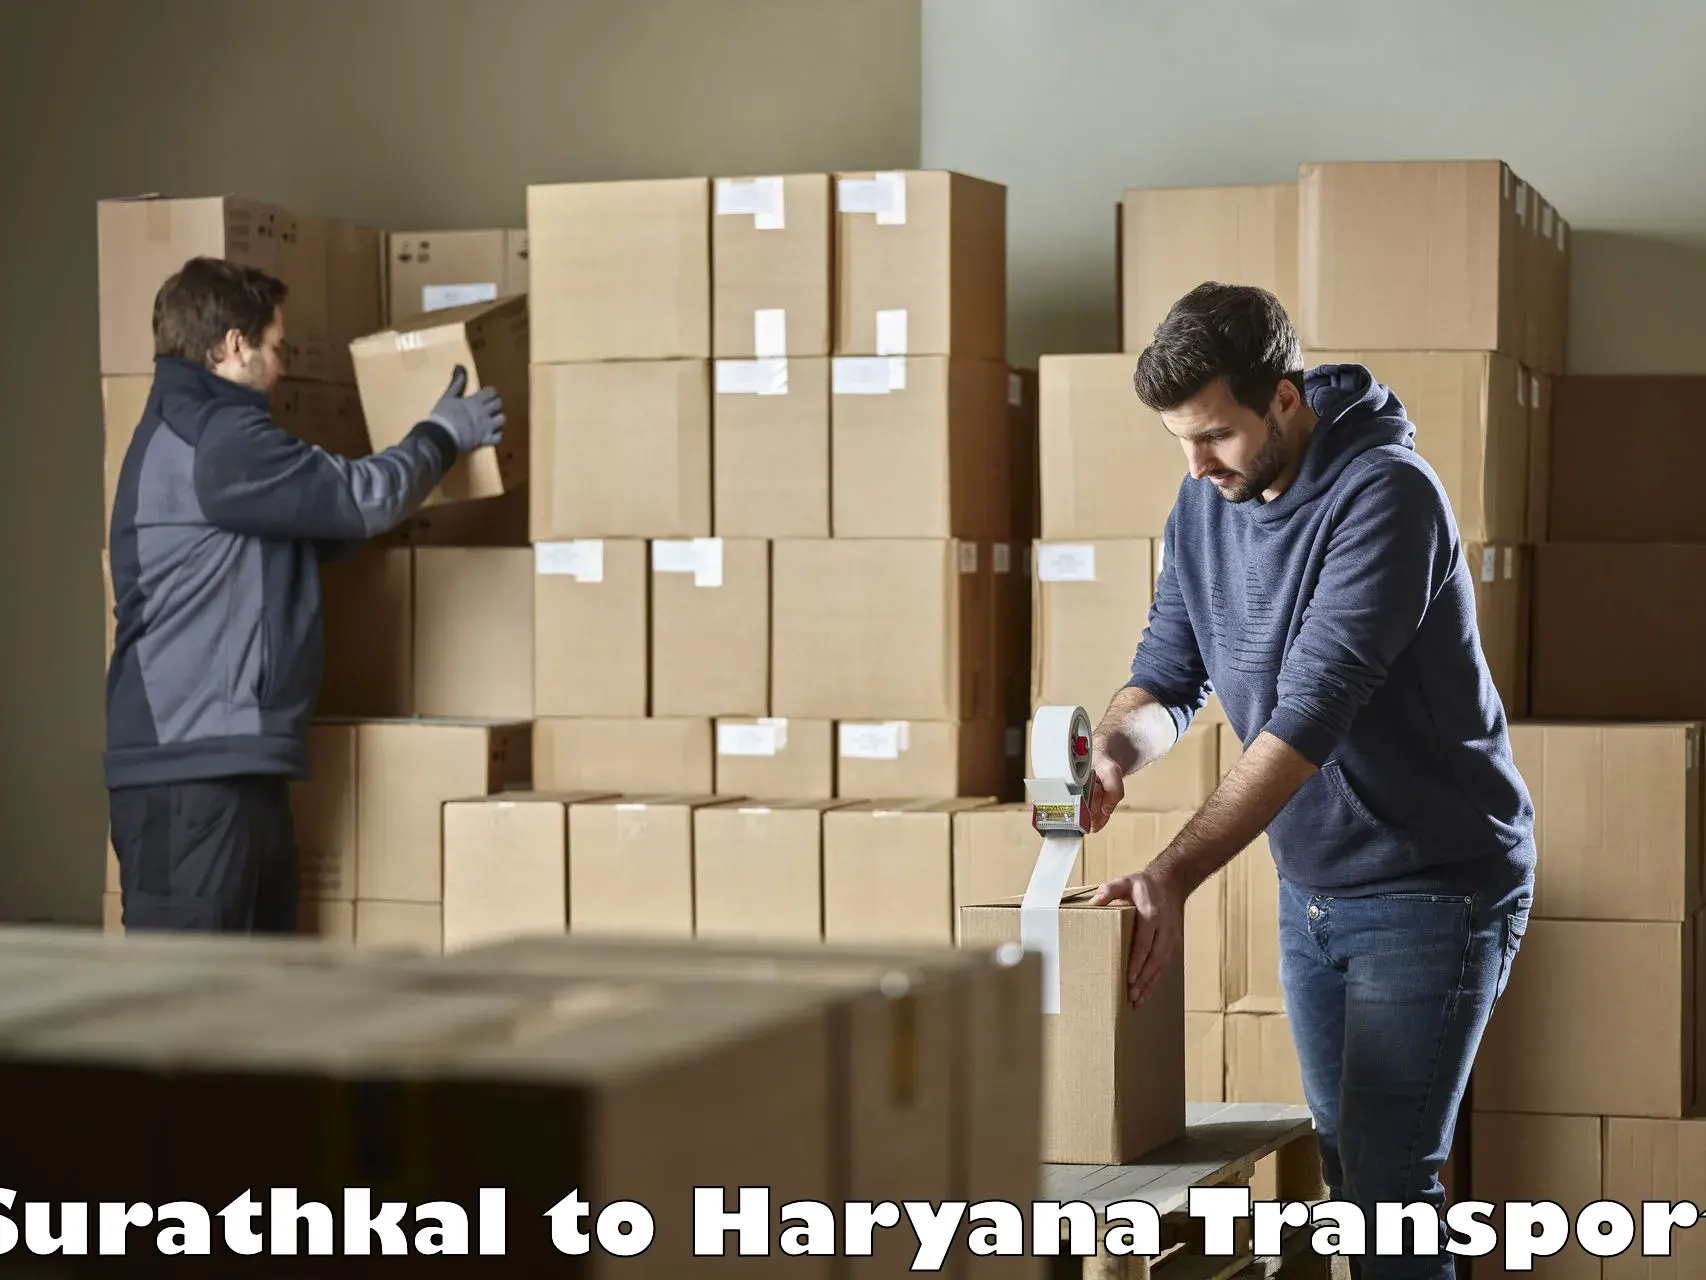 Truck transport companies in India Surathkal to Mahendragarh